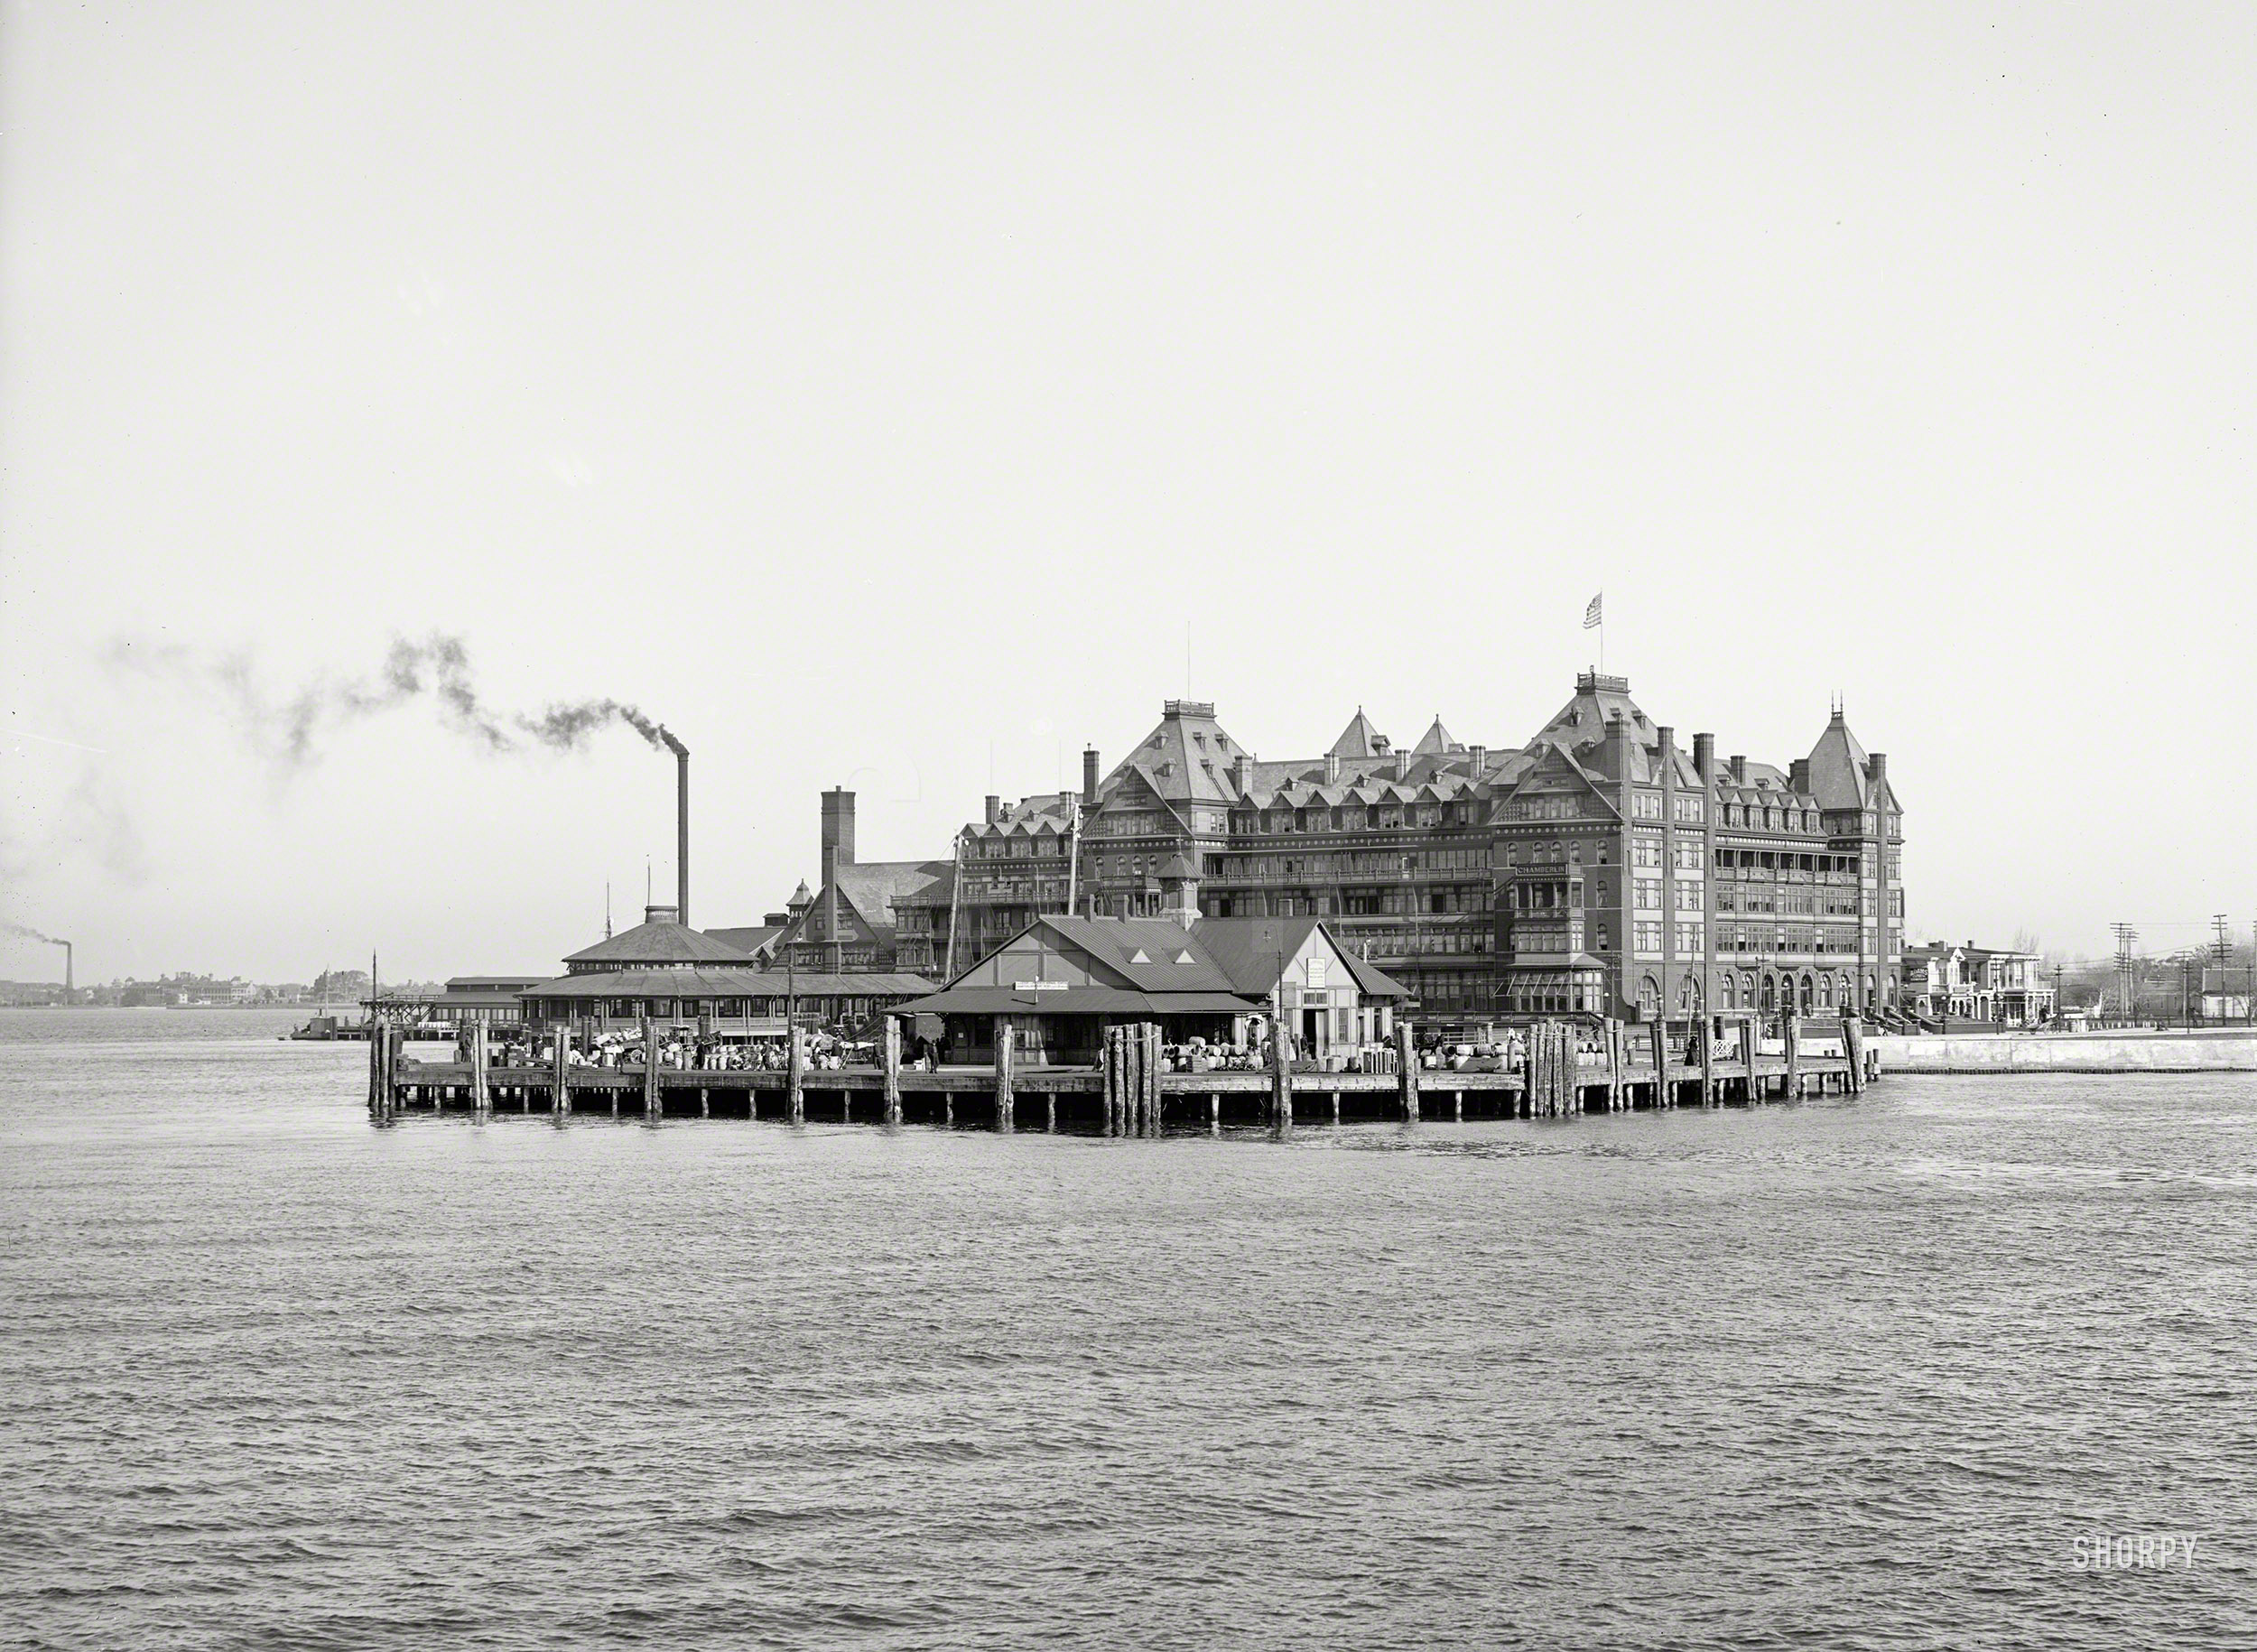 &nbsp; &nbsp; &nbsp; &nbsp; The Chamberlin, a gigantic Queen Anne-style hotel designed by the firm of Smithmeyer and Pelz, architects of the Library of Congress, opened in 1894 and was destroyed by fire in 1920.
1905. "Hotel Chamberlin and government dock, Old Point Comfort, Virginia."  8x10 inch glass negative, Detroit Publishing Company. View full size.